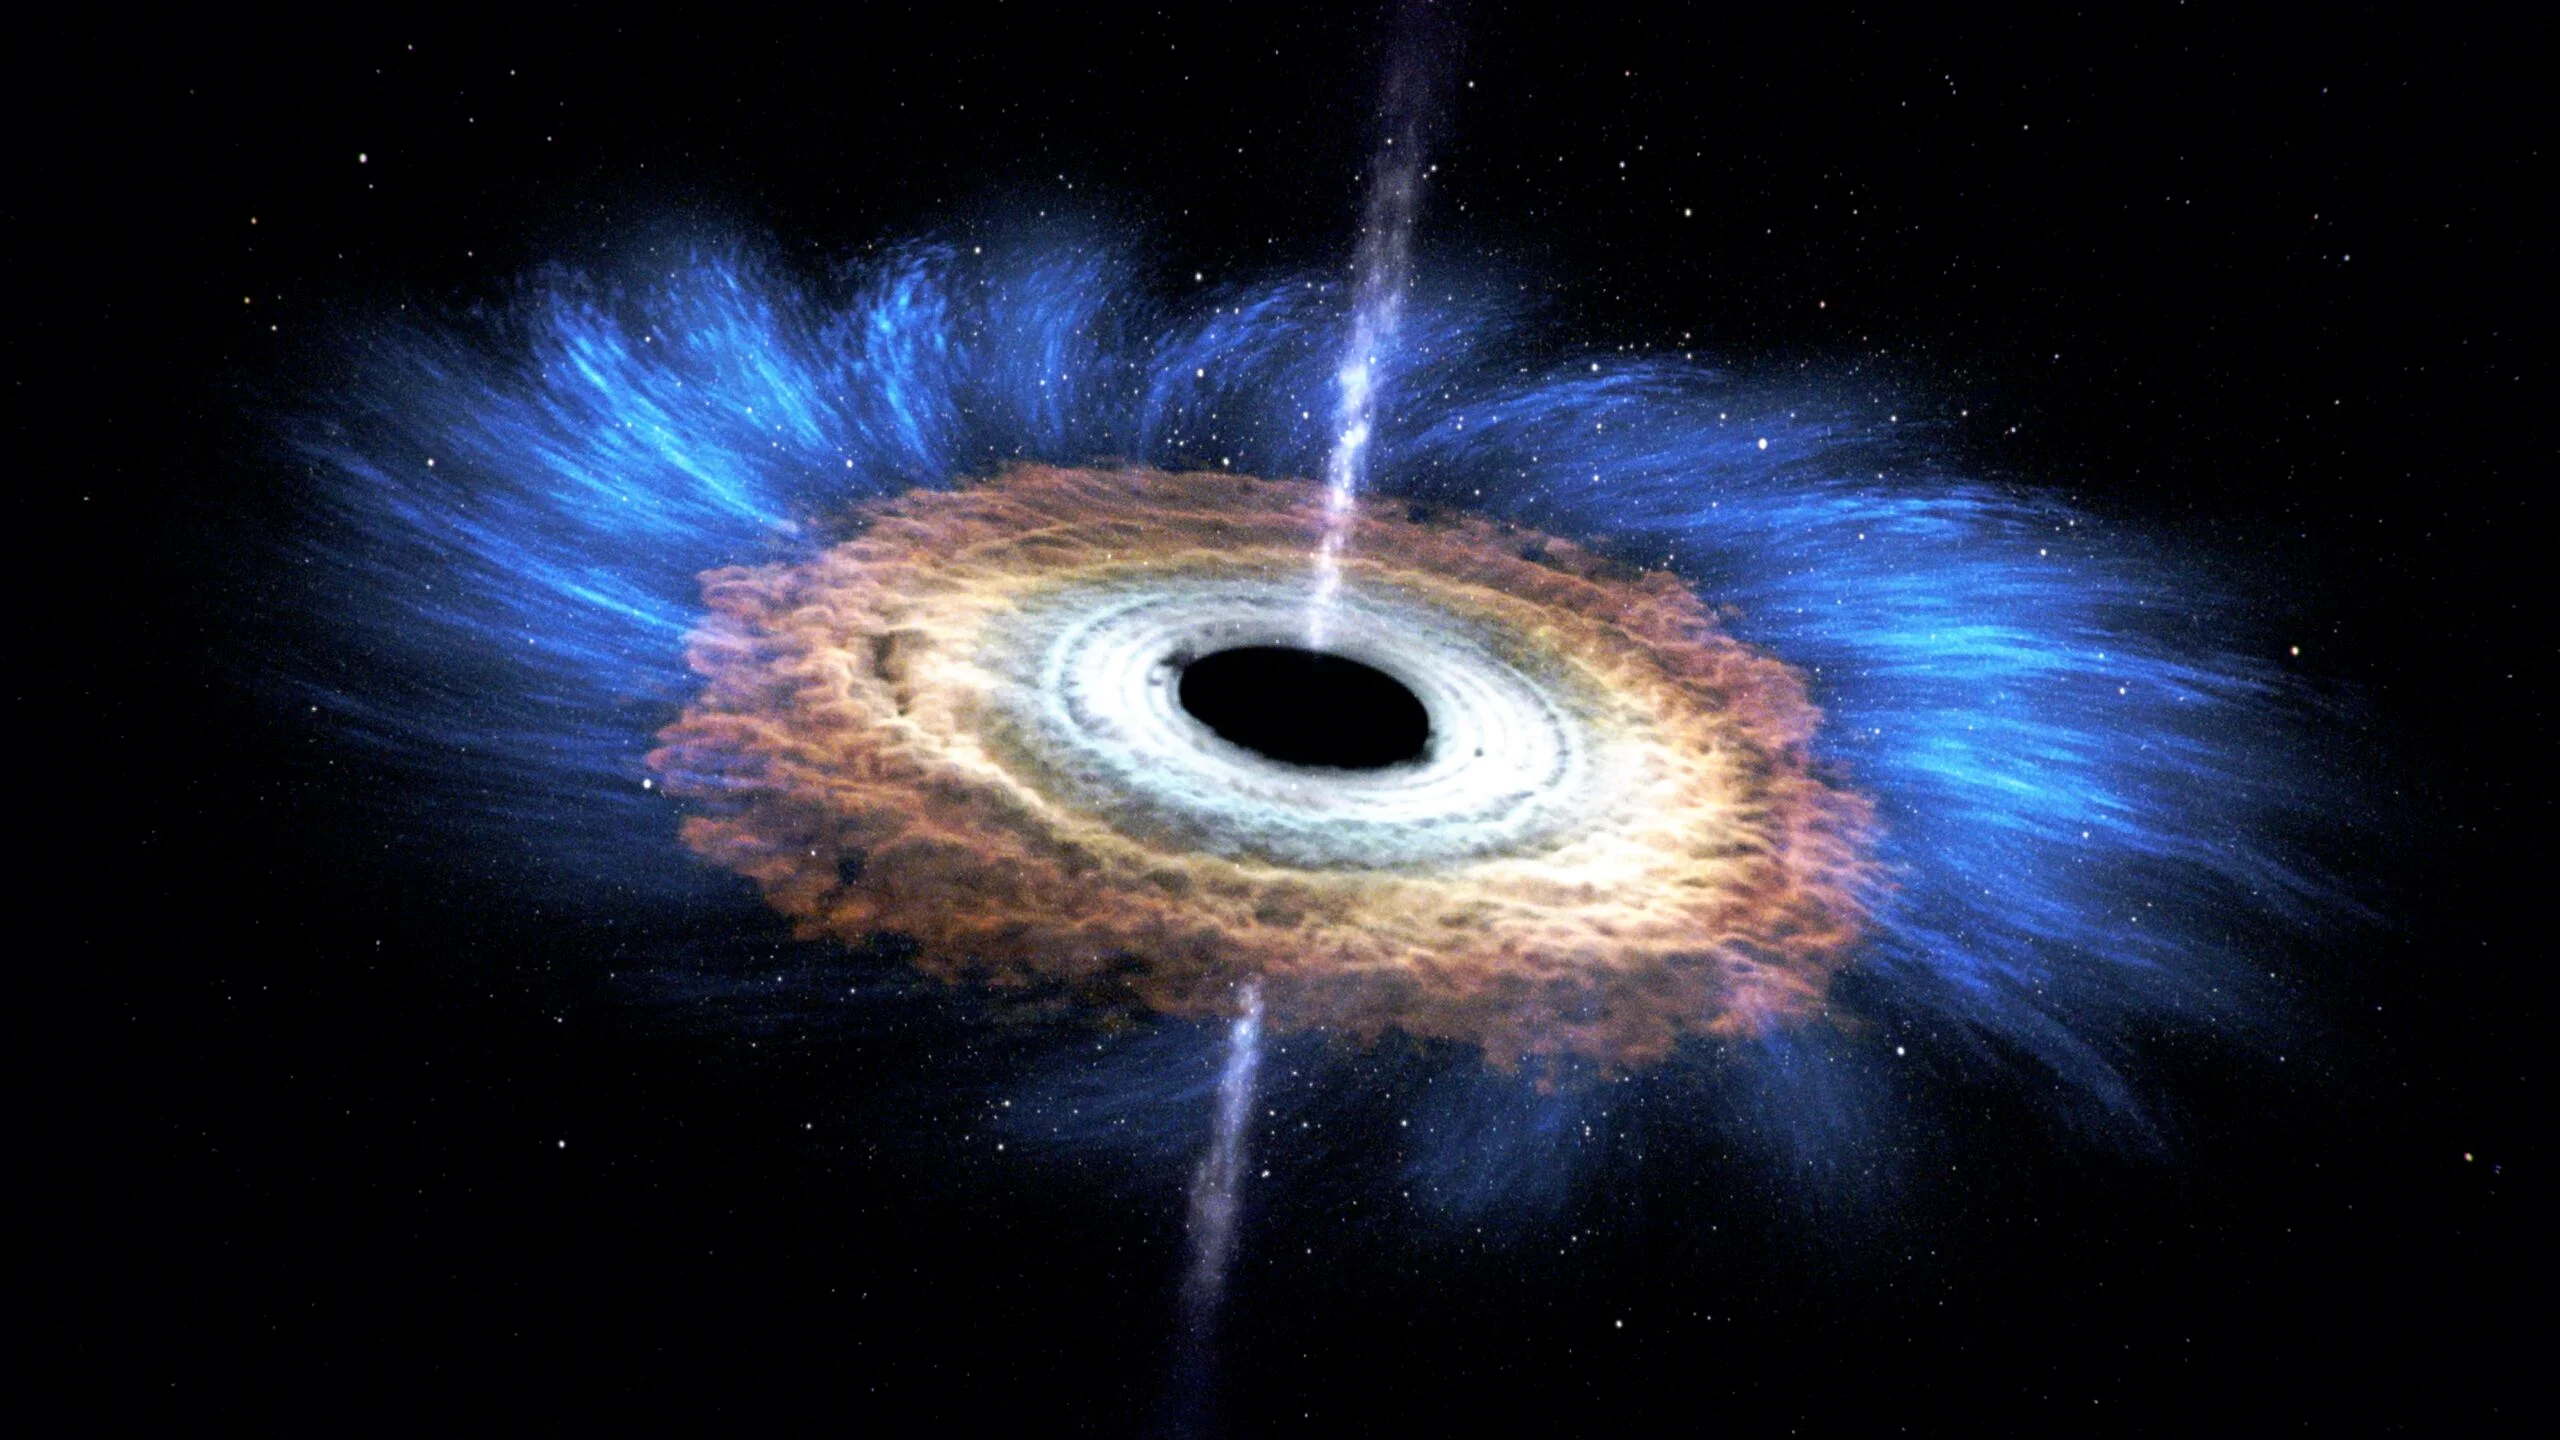 The supermassive black hole at the centre of our galaxy is tearing apart and devouring an unknown object X7 with a mass of about 50 Earth masses and a speed of 4 million km/h